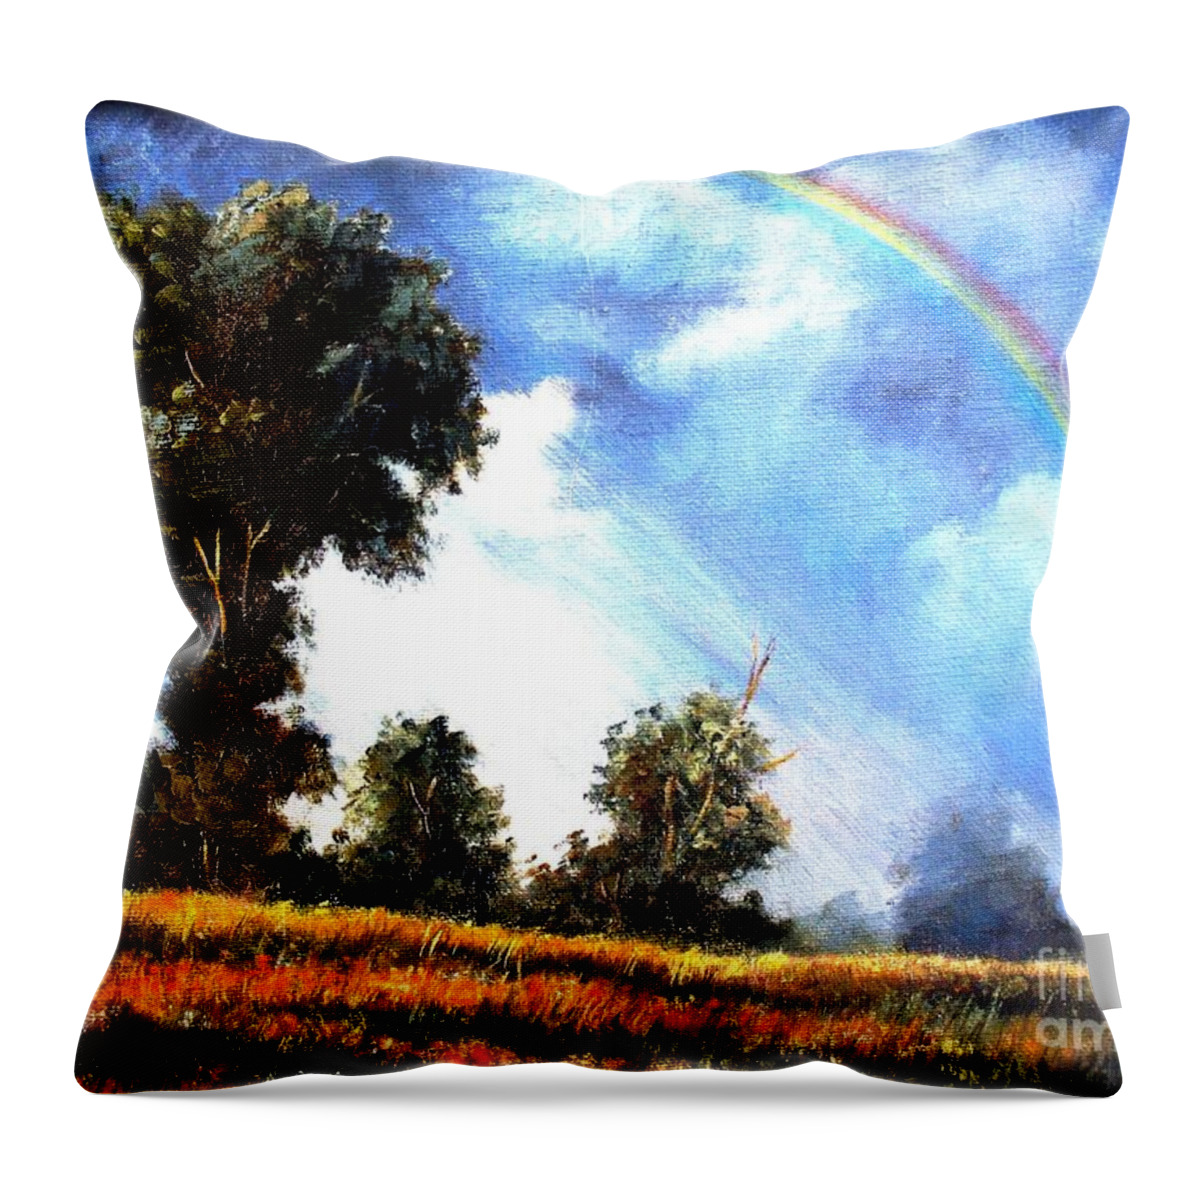 Rainbow Throw Pillow featuring the painting The Promise by Hazel Holland